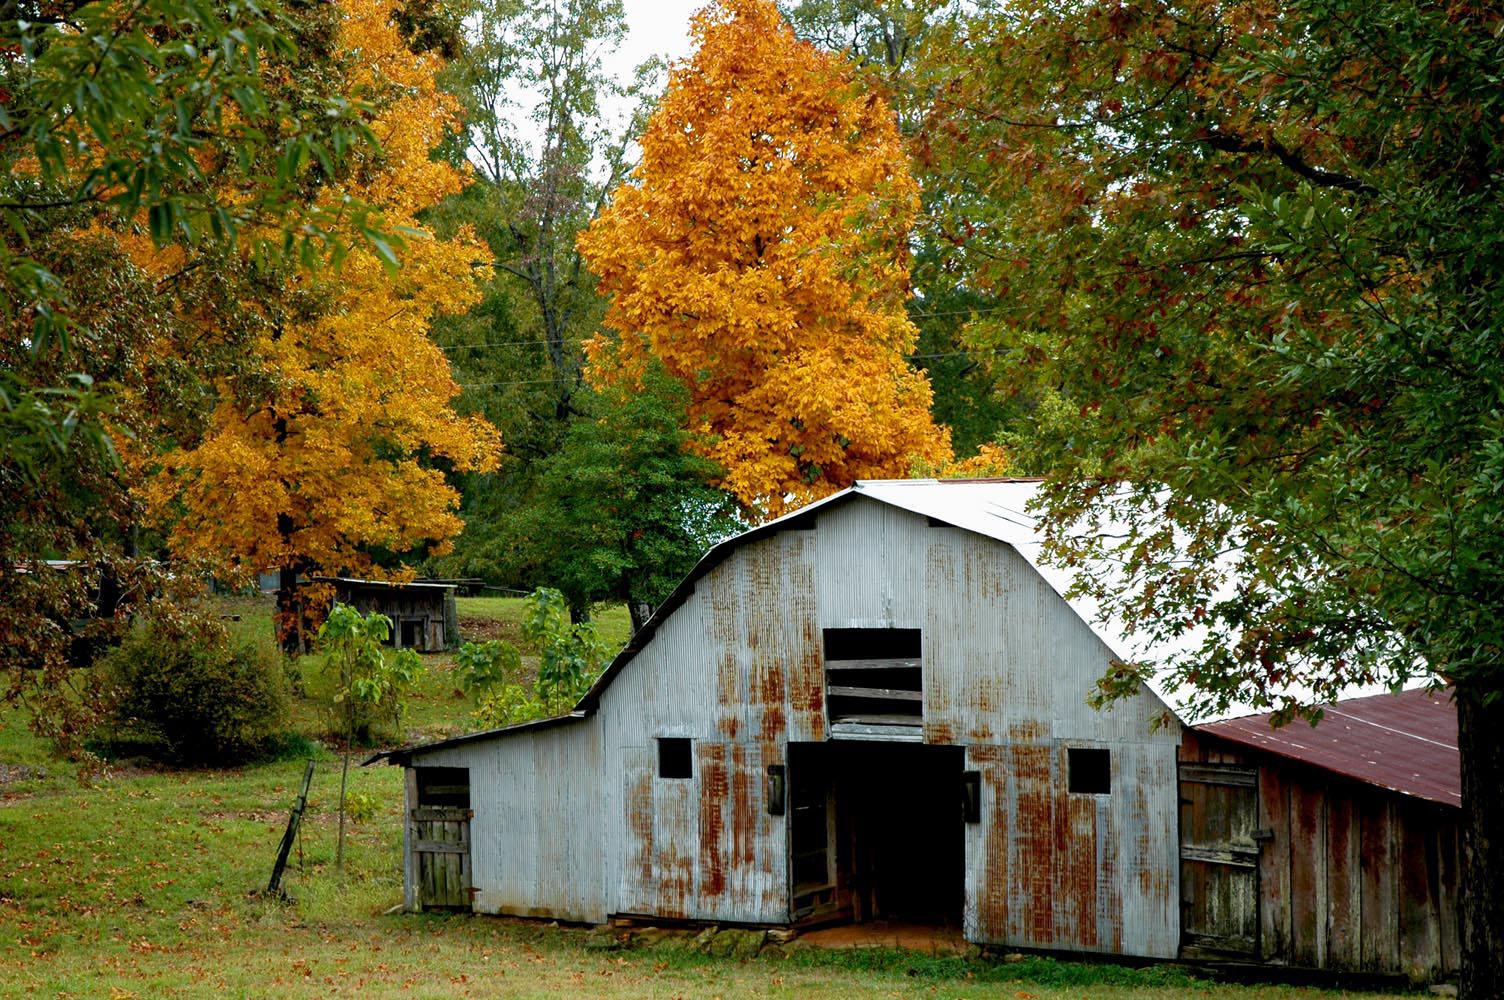 Colorful hickories stand out in this rural setting visible recently in central Mississippi between Louisville and Kosciusko.